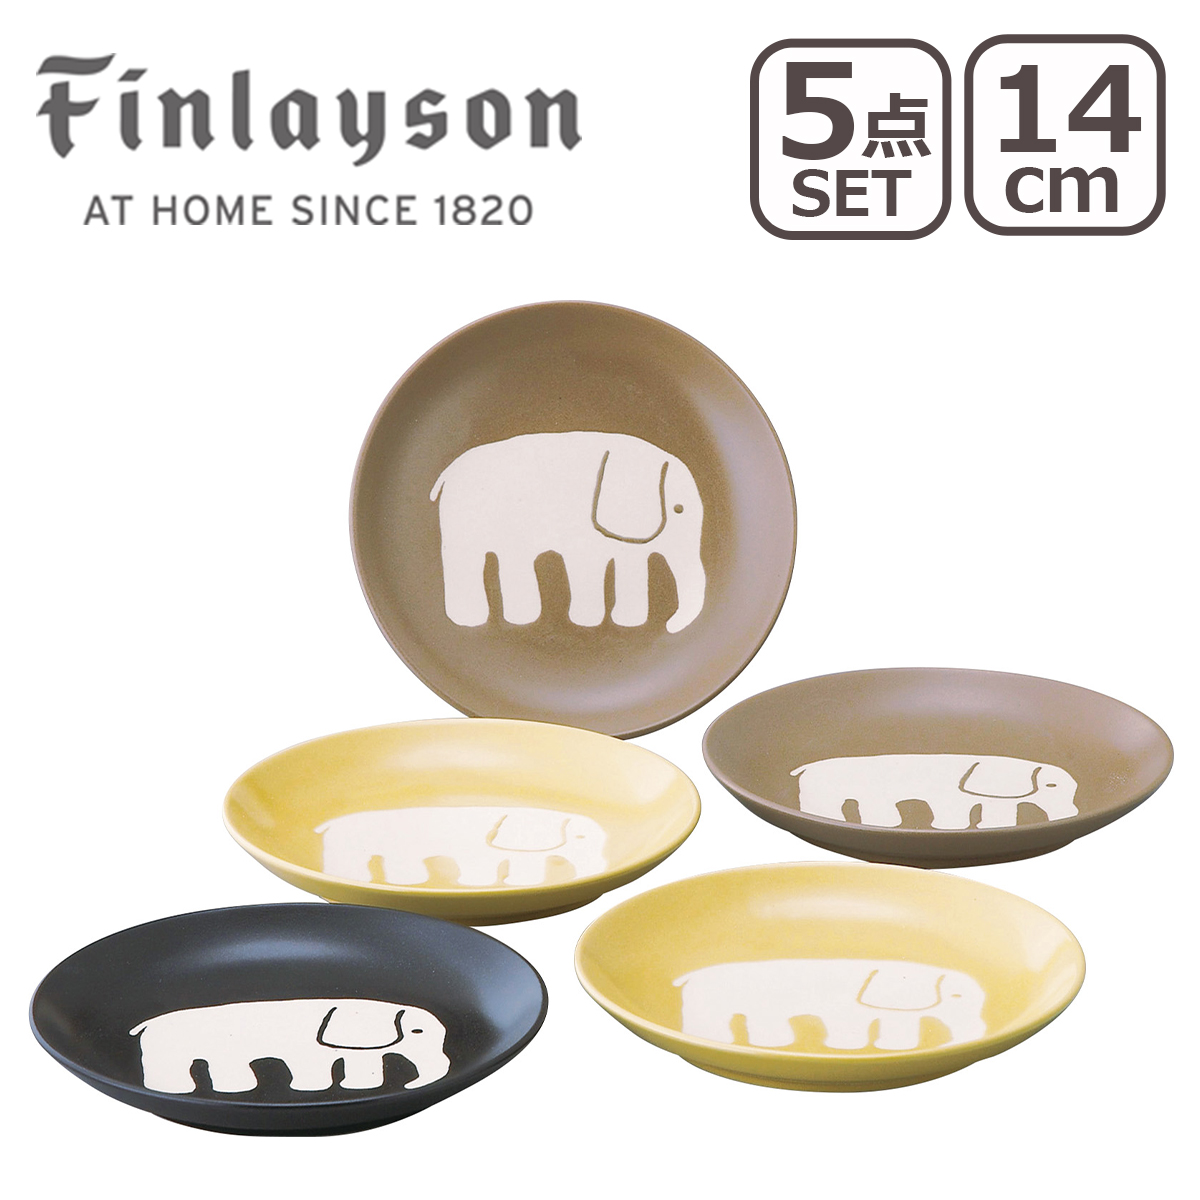 Finlayson（フィンレイソン）ファイブプレートセット FIN140-57 14cmプレート 5点セット エレファンティ リサイクルセラミック 北欧デザイン 日本製｜daily-3